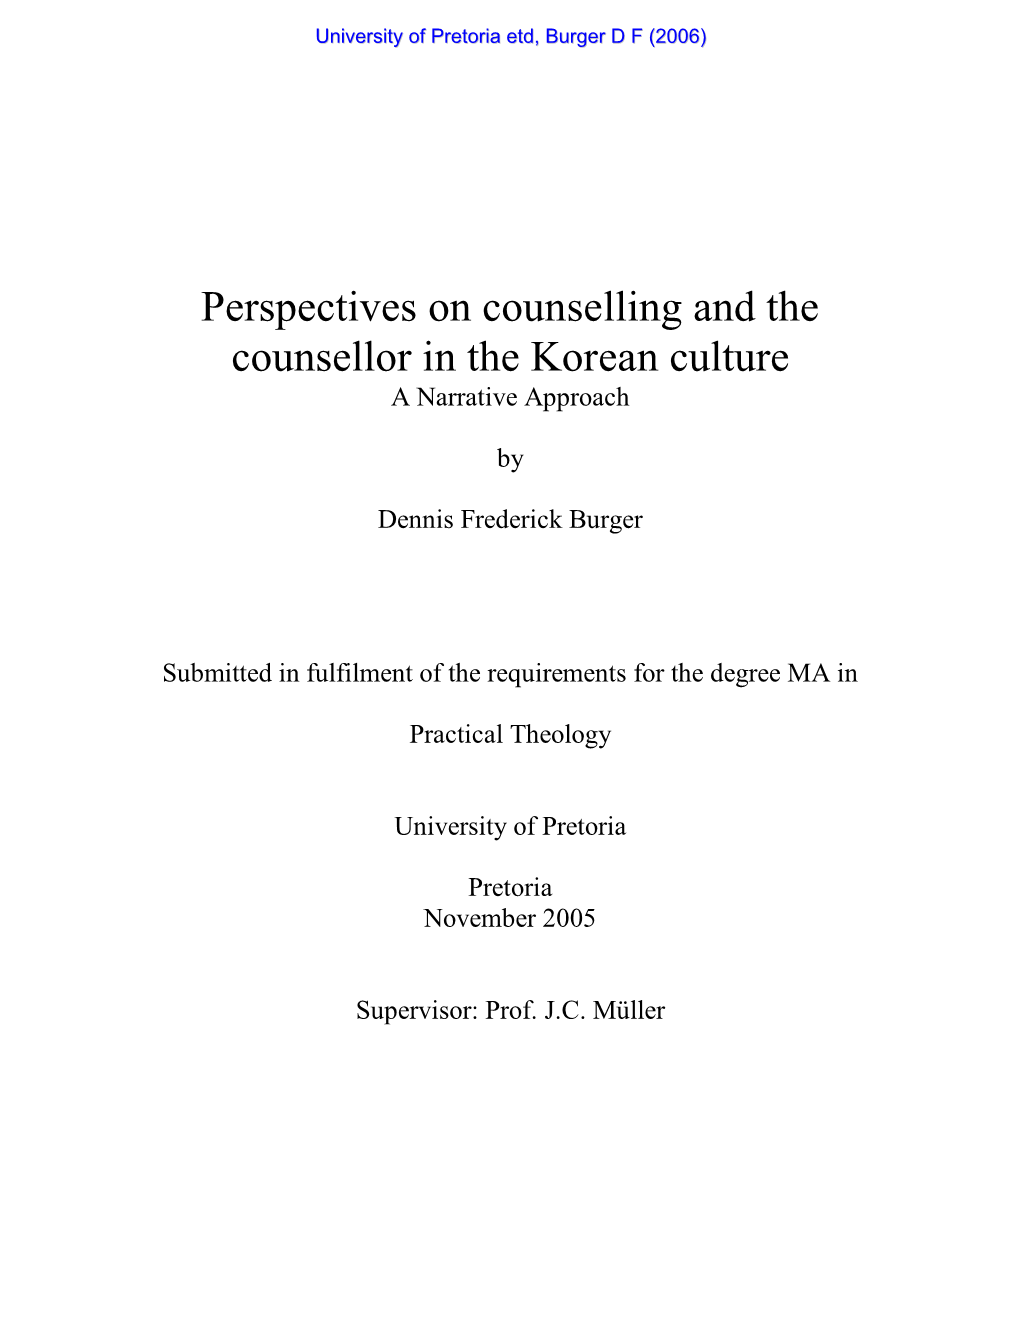 Perspectives on Counselling and the Counsellor in the Korean Culture a Narrative Approach